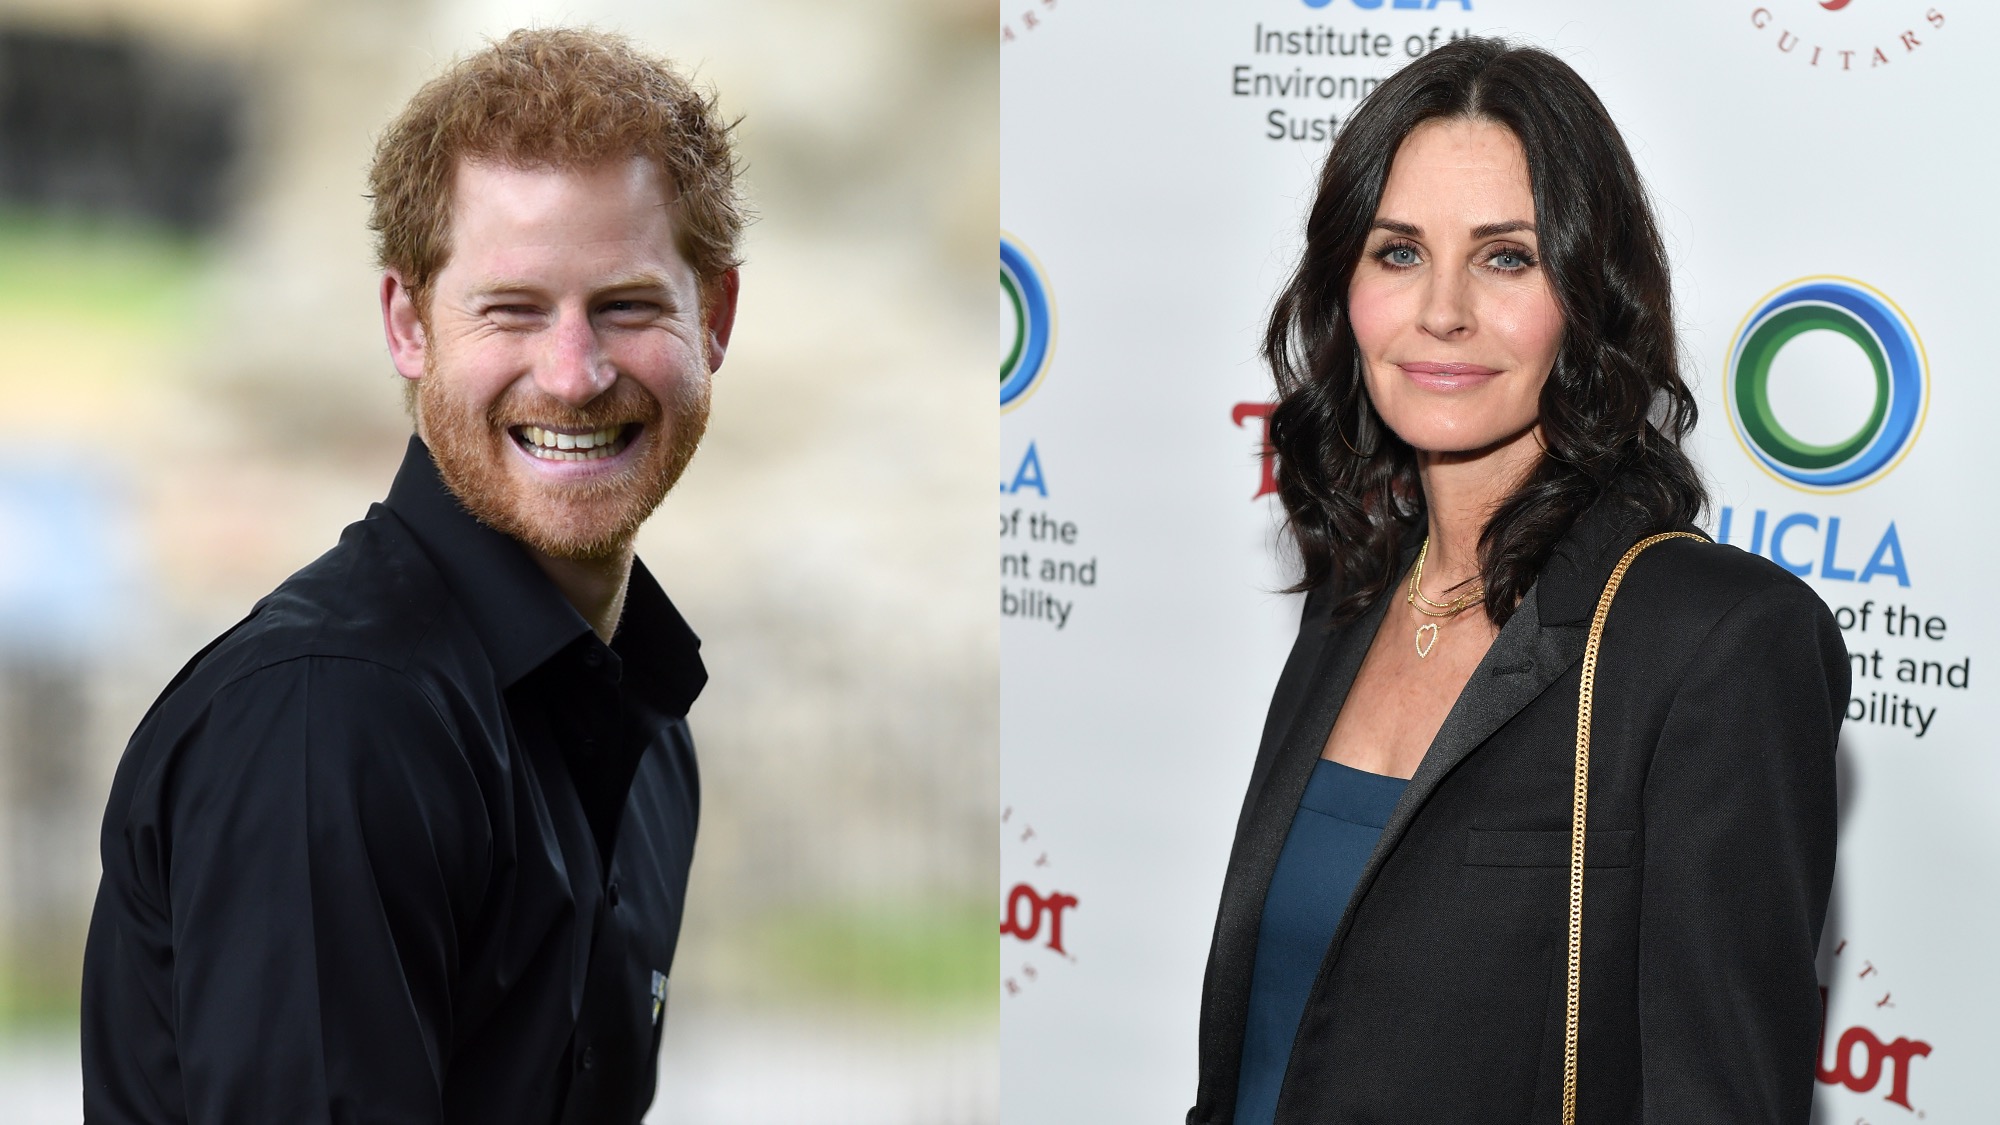 (L) Prince Harry attends the UK Team Launch For Invictus Games Toronto 2017 at The Tower of London on May 30, 2017. (R) Courteney Cox attends UCLA's 2018 Institute of the Environment and Sustainability Gala on March 22, 2018.